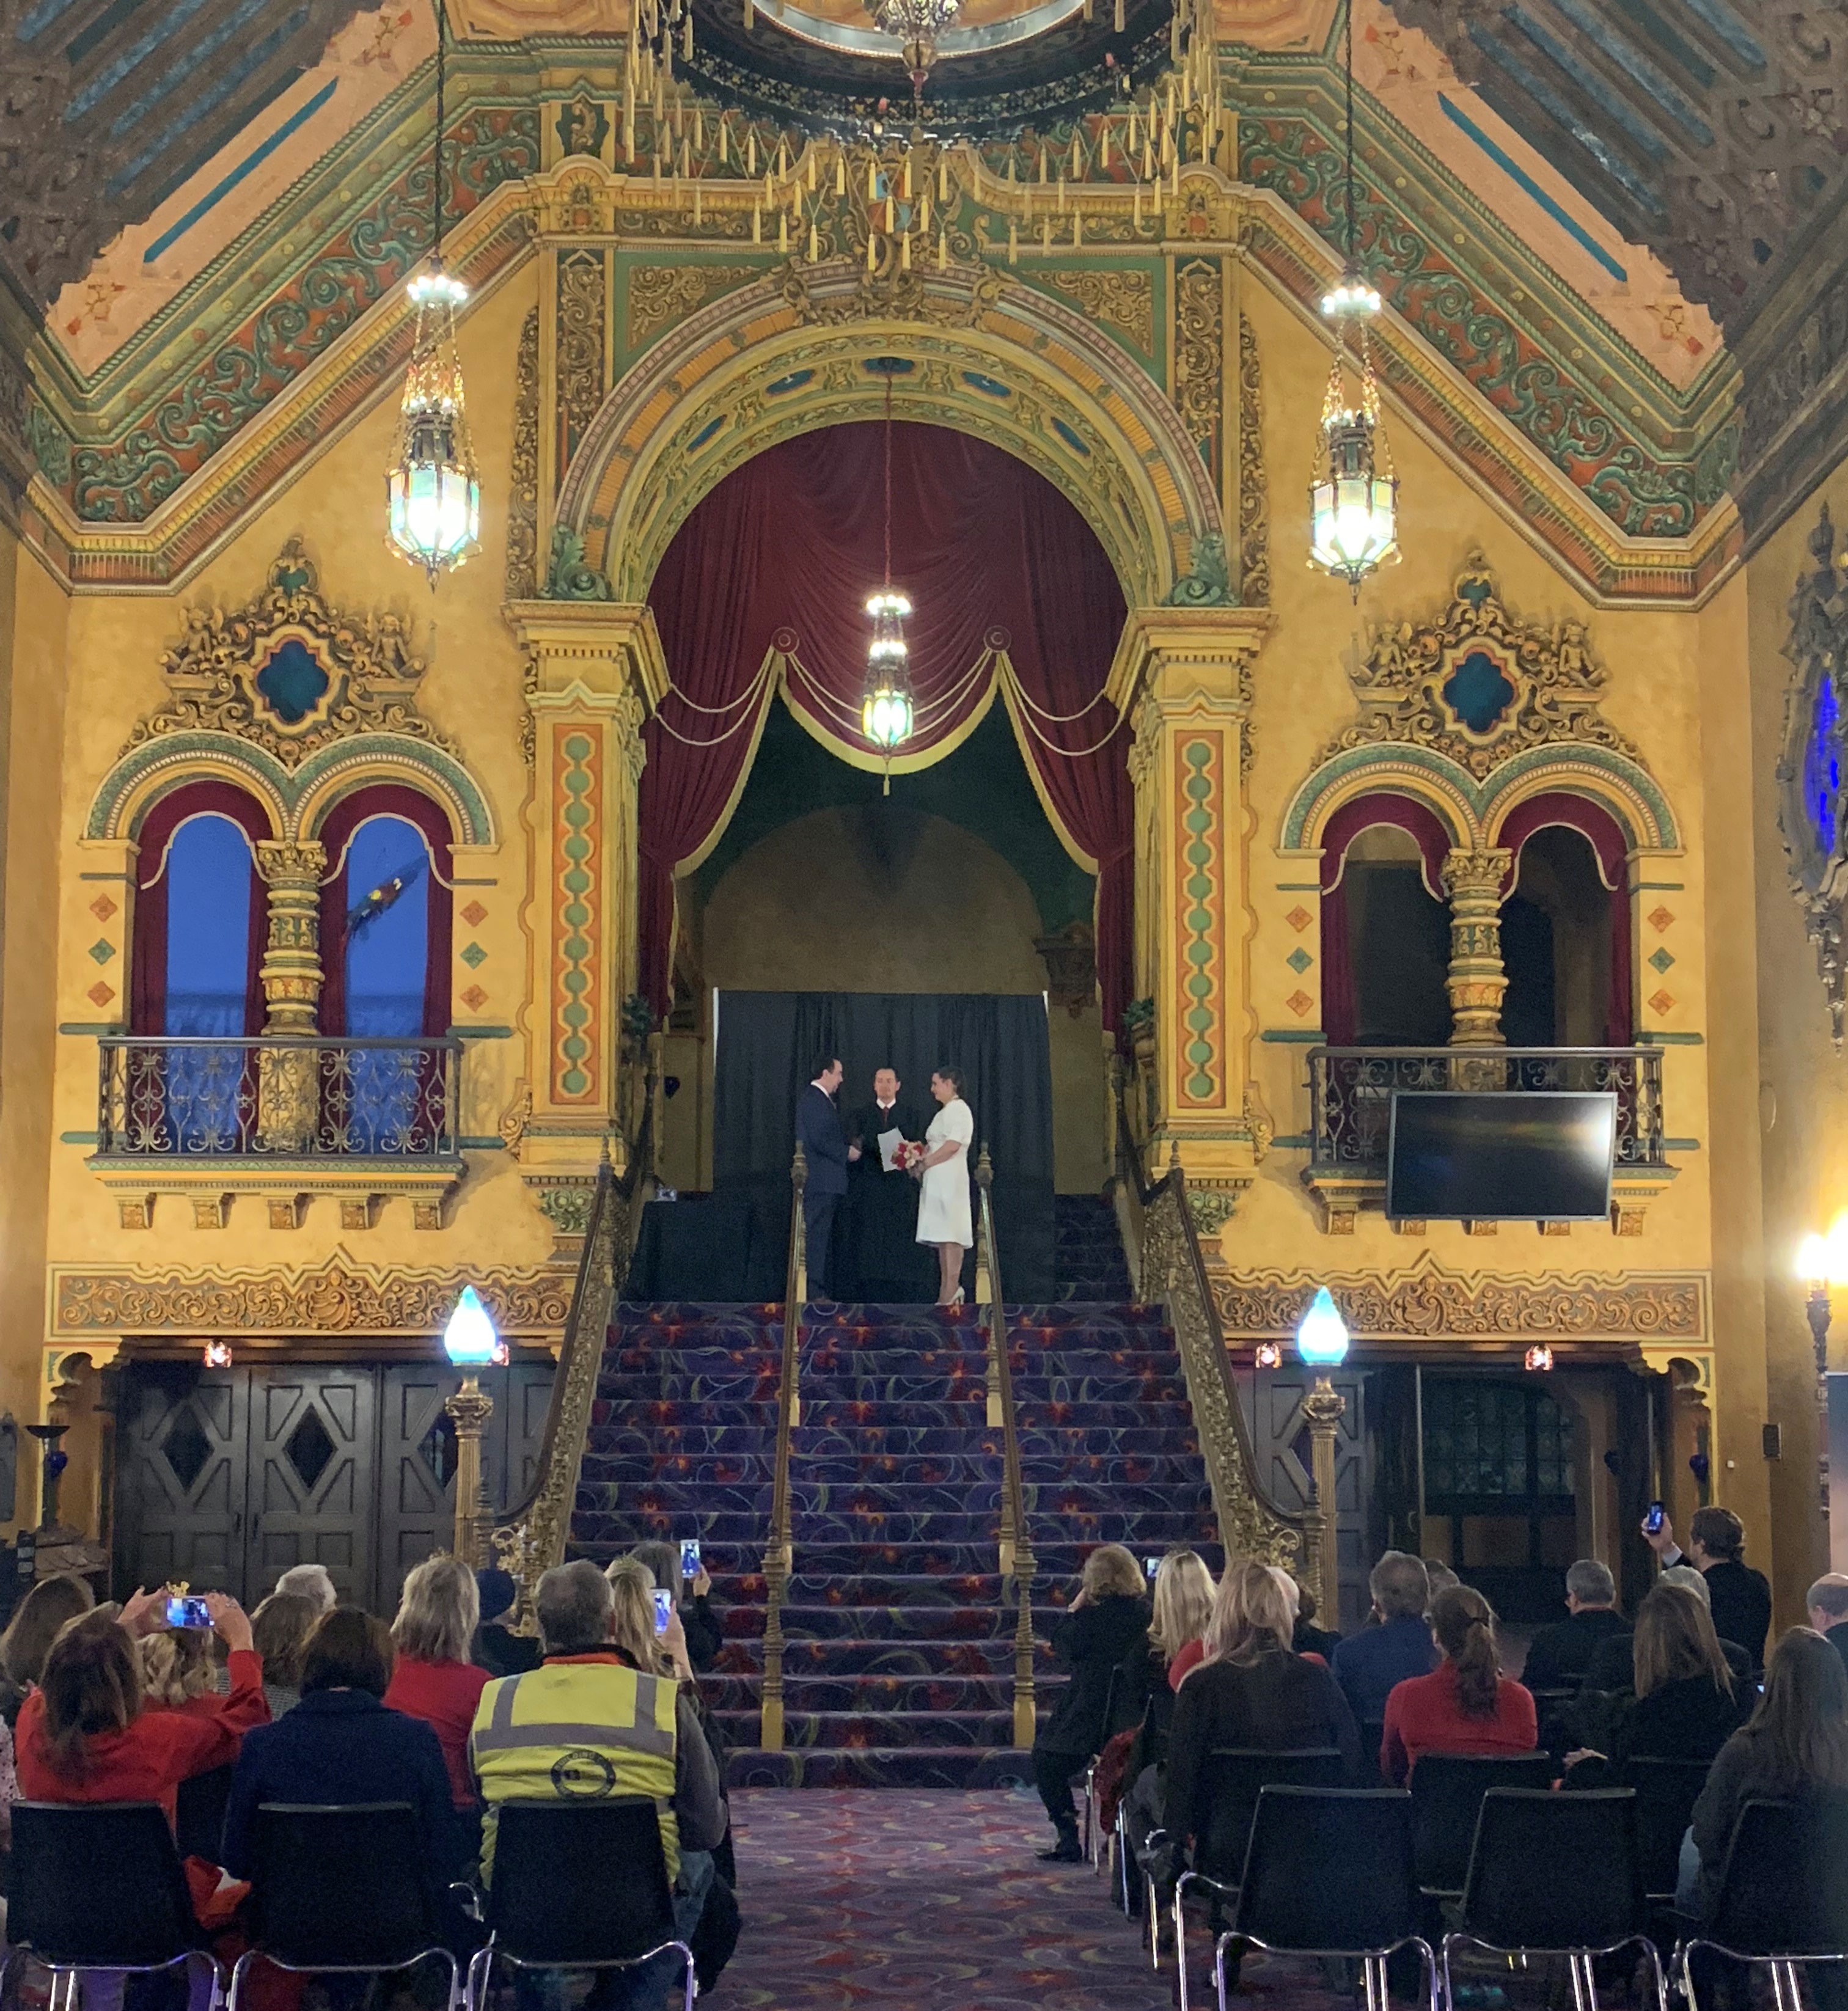 Mr and Mrs Tom and Tia Farmakidis were married at the Akron Civic Theatre on Valentine's Day 2019